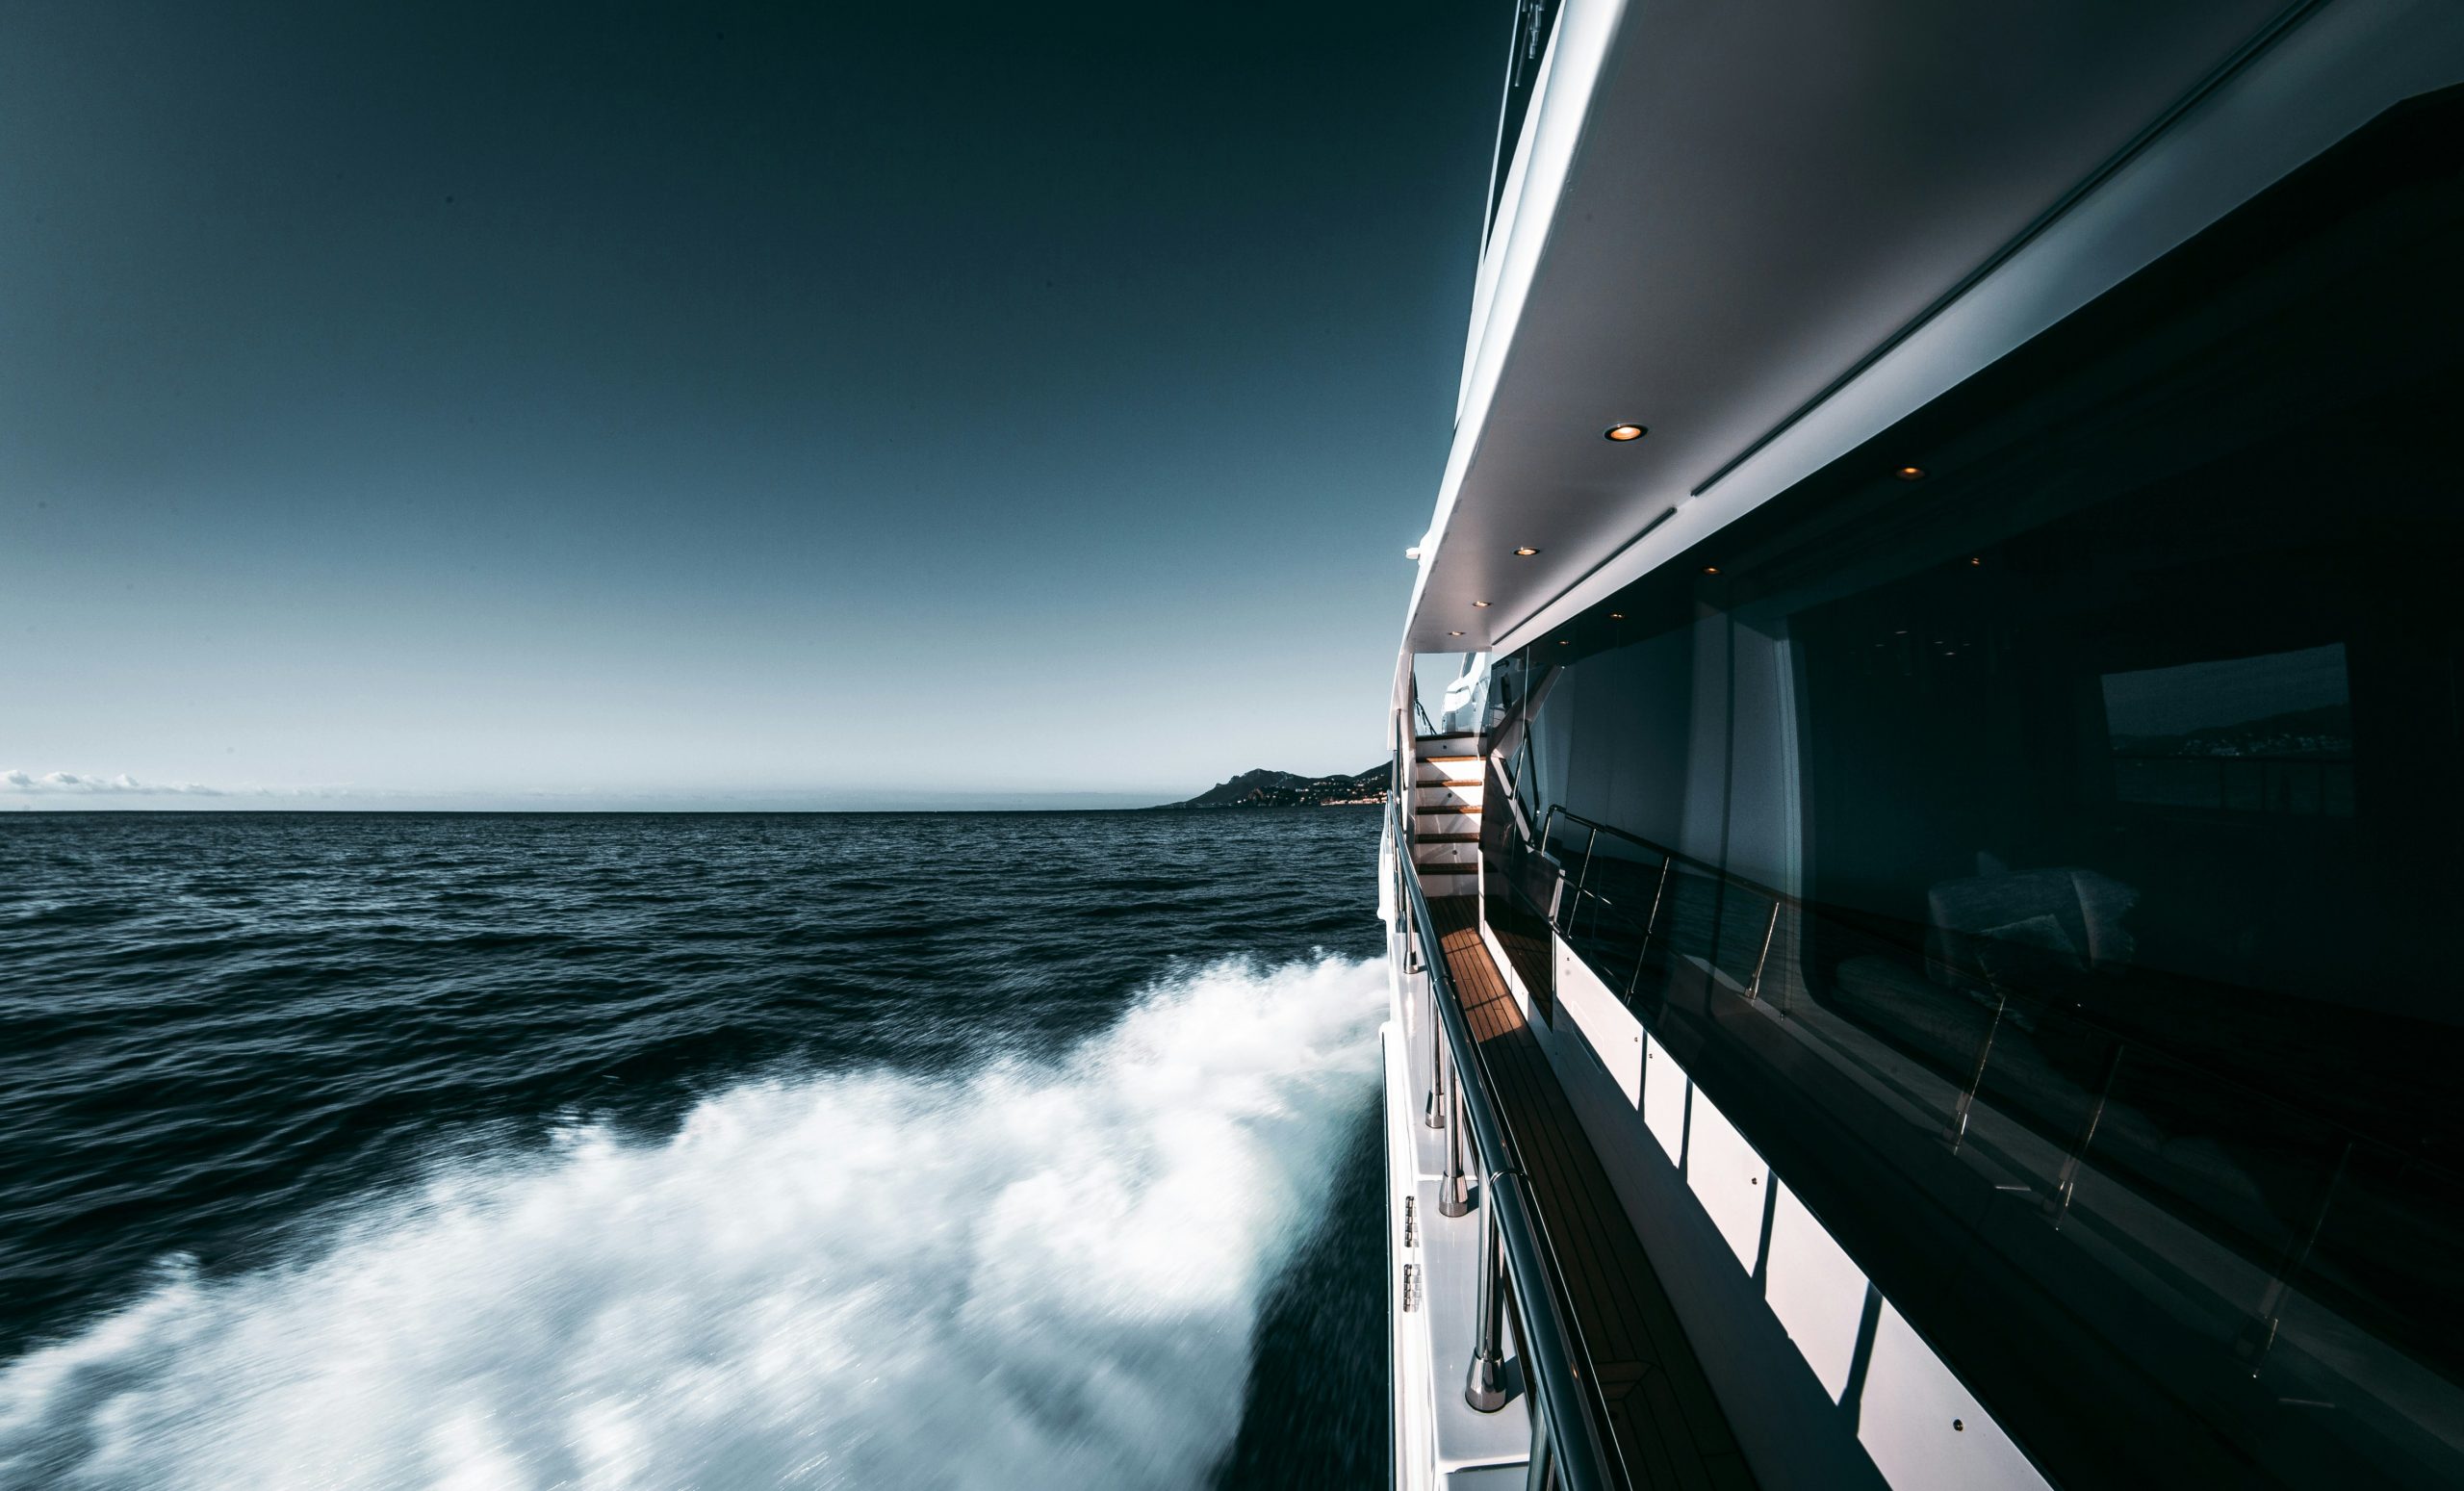 discover the thrill of cruising with our exclusive travel experiences. from luxurious voyages to adventurous expeditions, find your perfect cruise and set sail for unforgettable adventures.